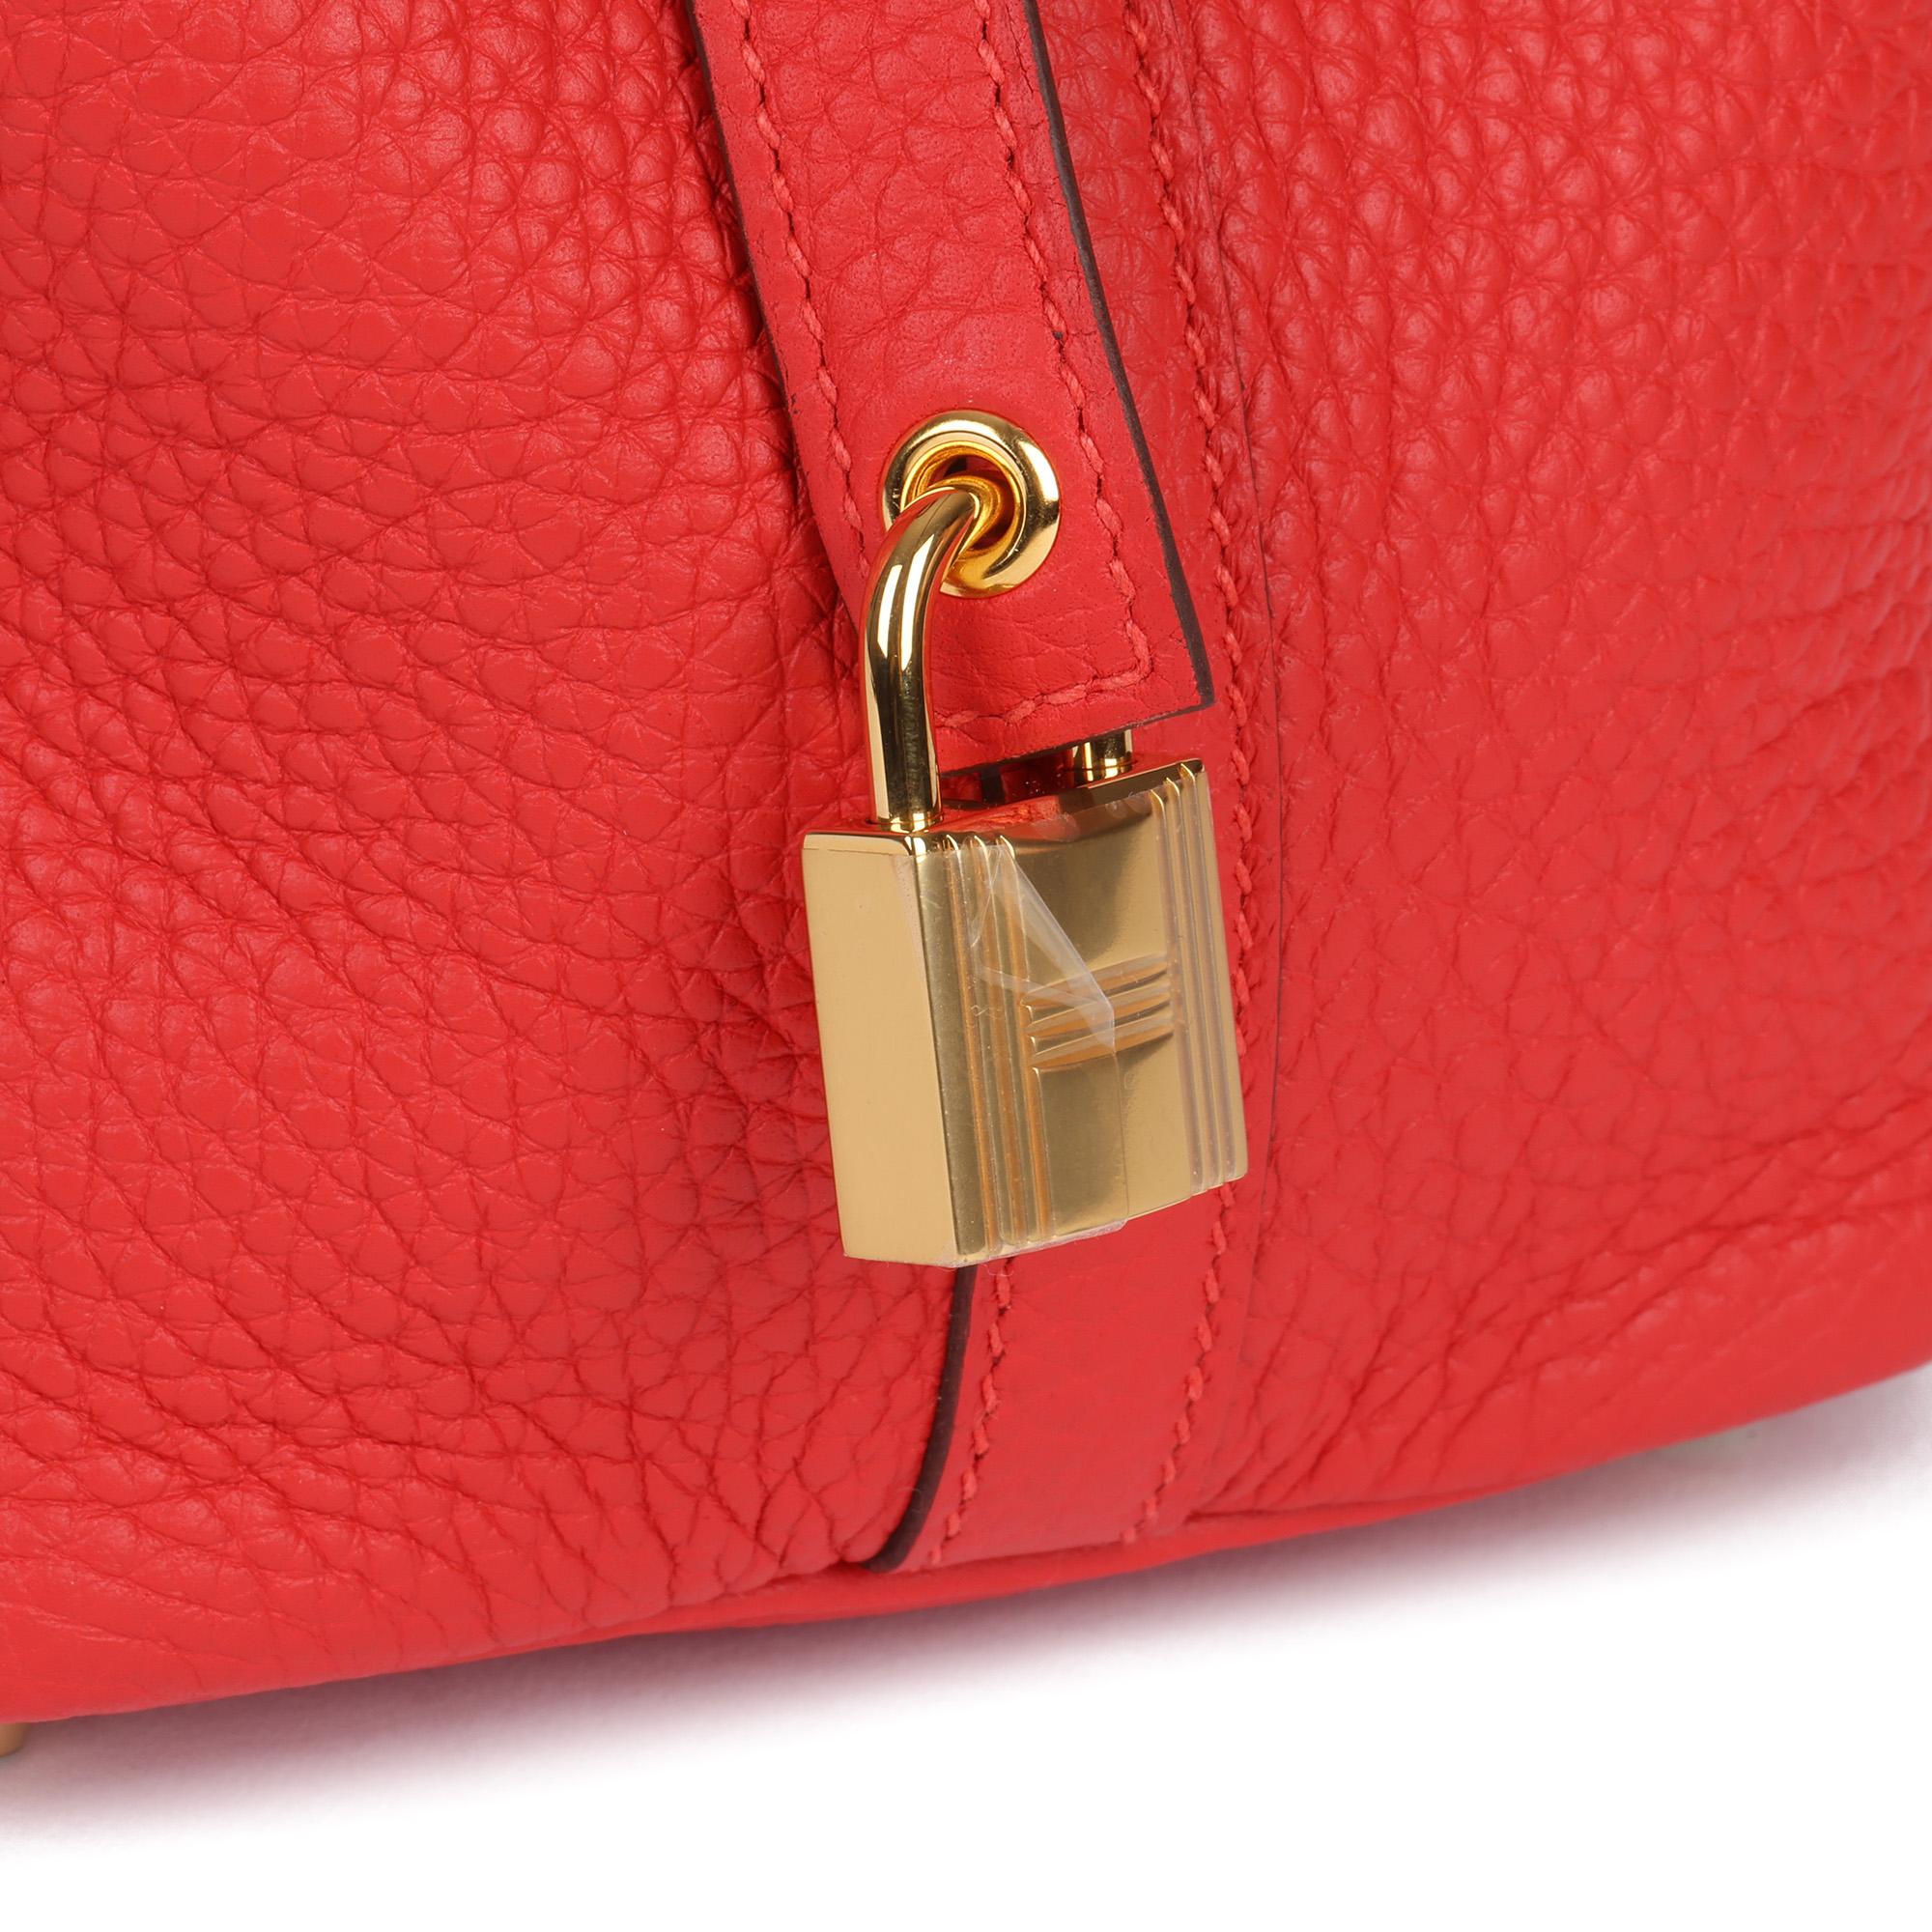 HERMÈS
Rouge Tomate Clemence Leather Picotin Lock 18cm

Xupes Reference: HB3997
Serial Number: Y
Age (Circa): 2021
Accompanied By: Hermès Dust Bag, Box, Lock, Keys, Invoice
Authenticity Details: Date Stamp (Made in France)
Gender: Ladies
Type: